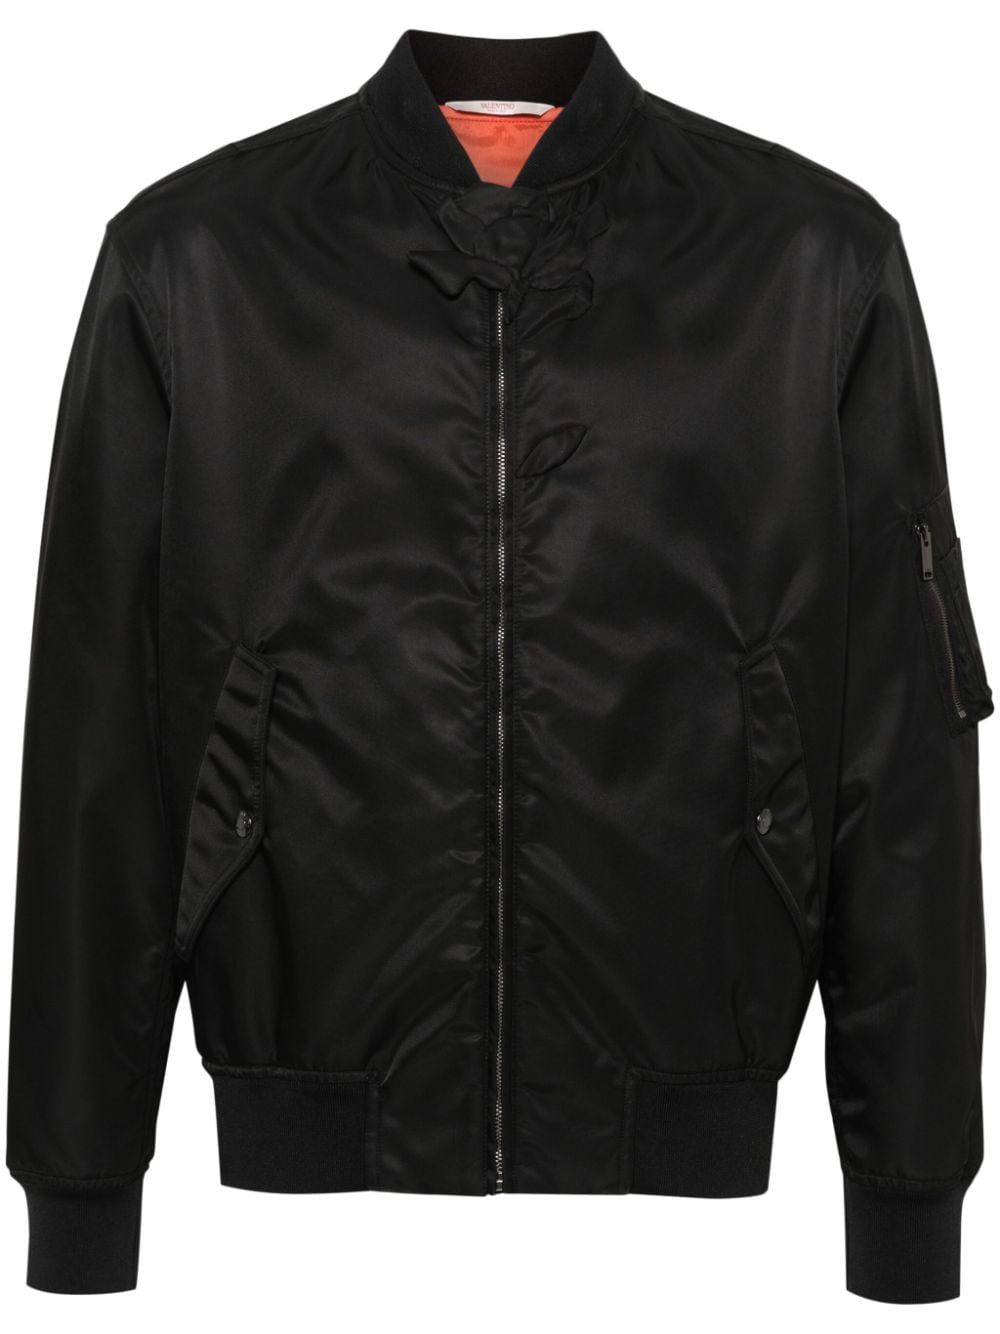 Valentino Men's Black Padded Bomber Jacket With Floral Embroidery And Stud Fastenings